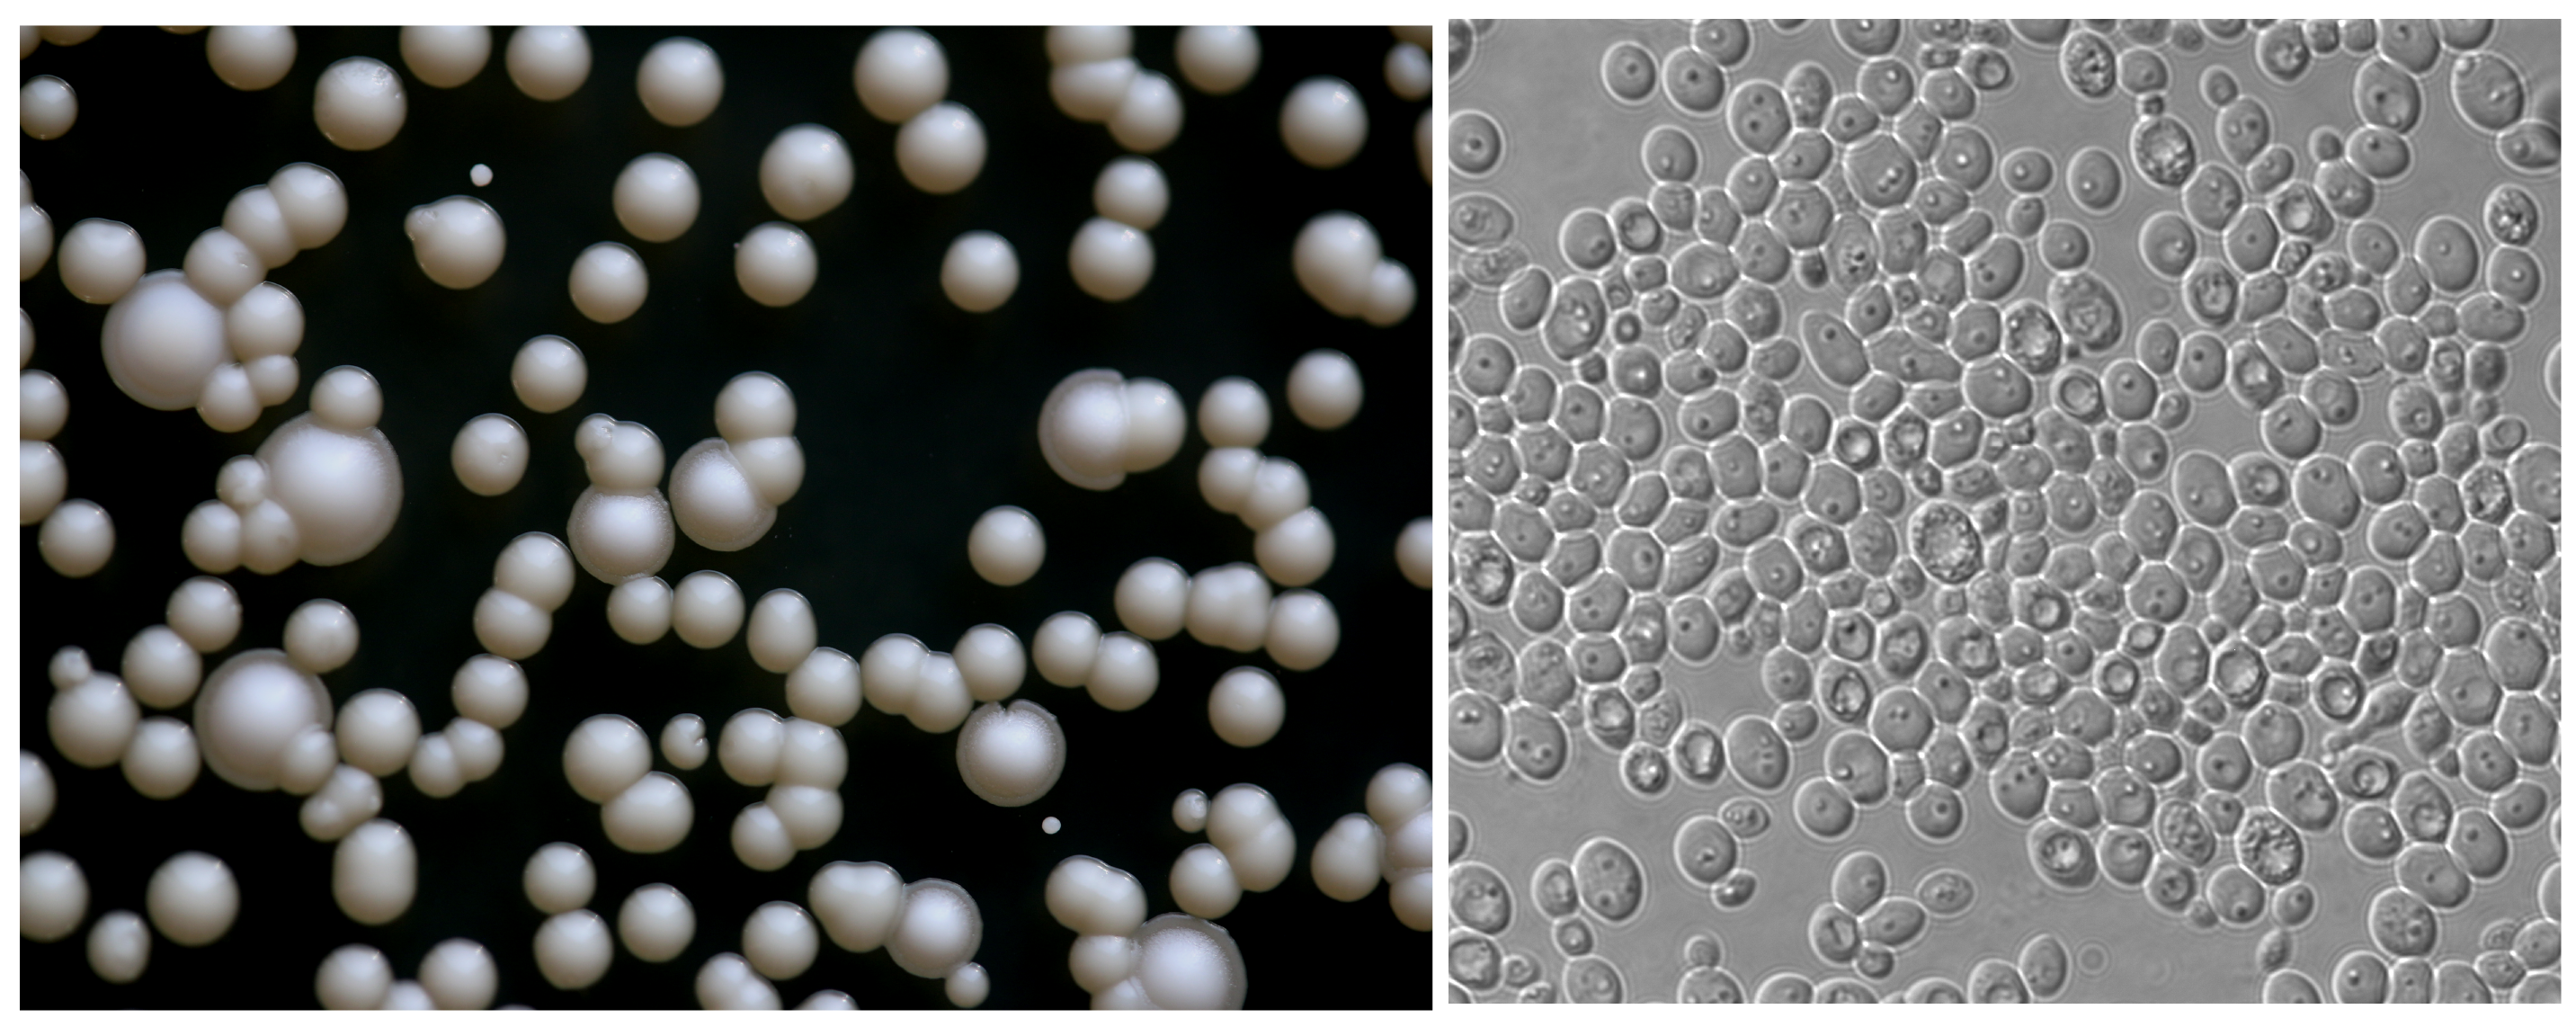 Left: K. naganishii  growing as colonies.  The smaller shiny colonies (without rings around them) are K. naganishii  Right: K. naganishii cells at magnification. 